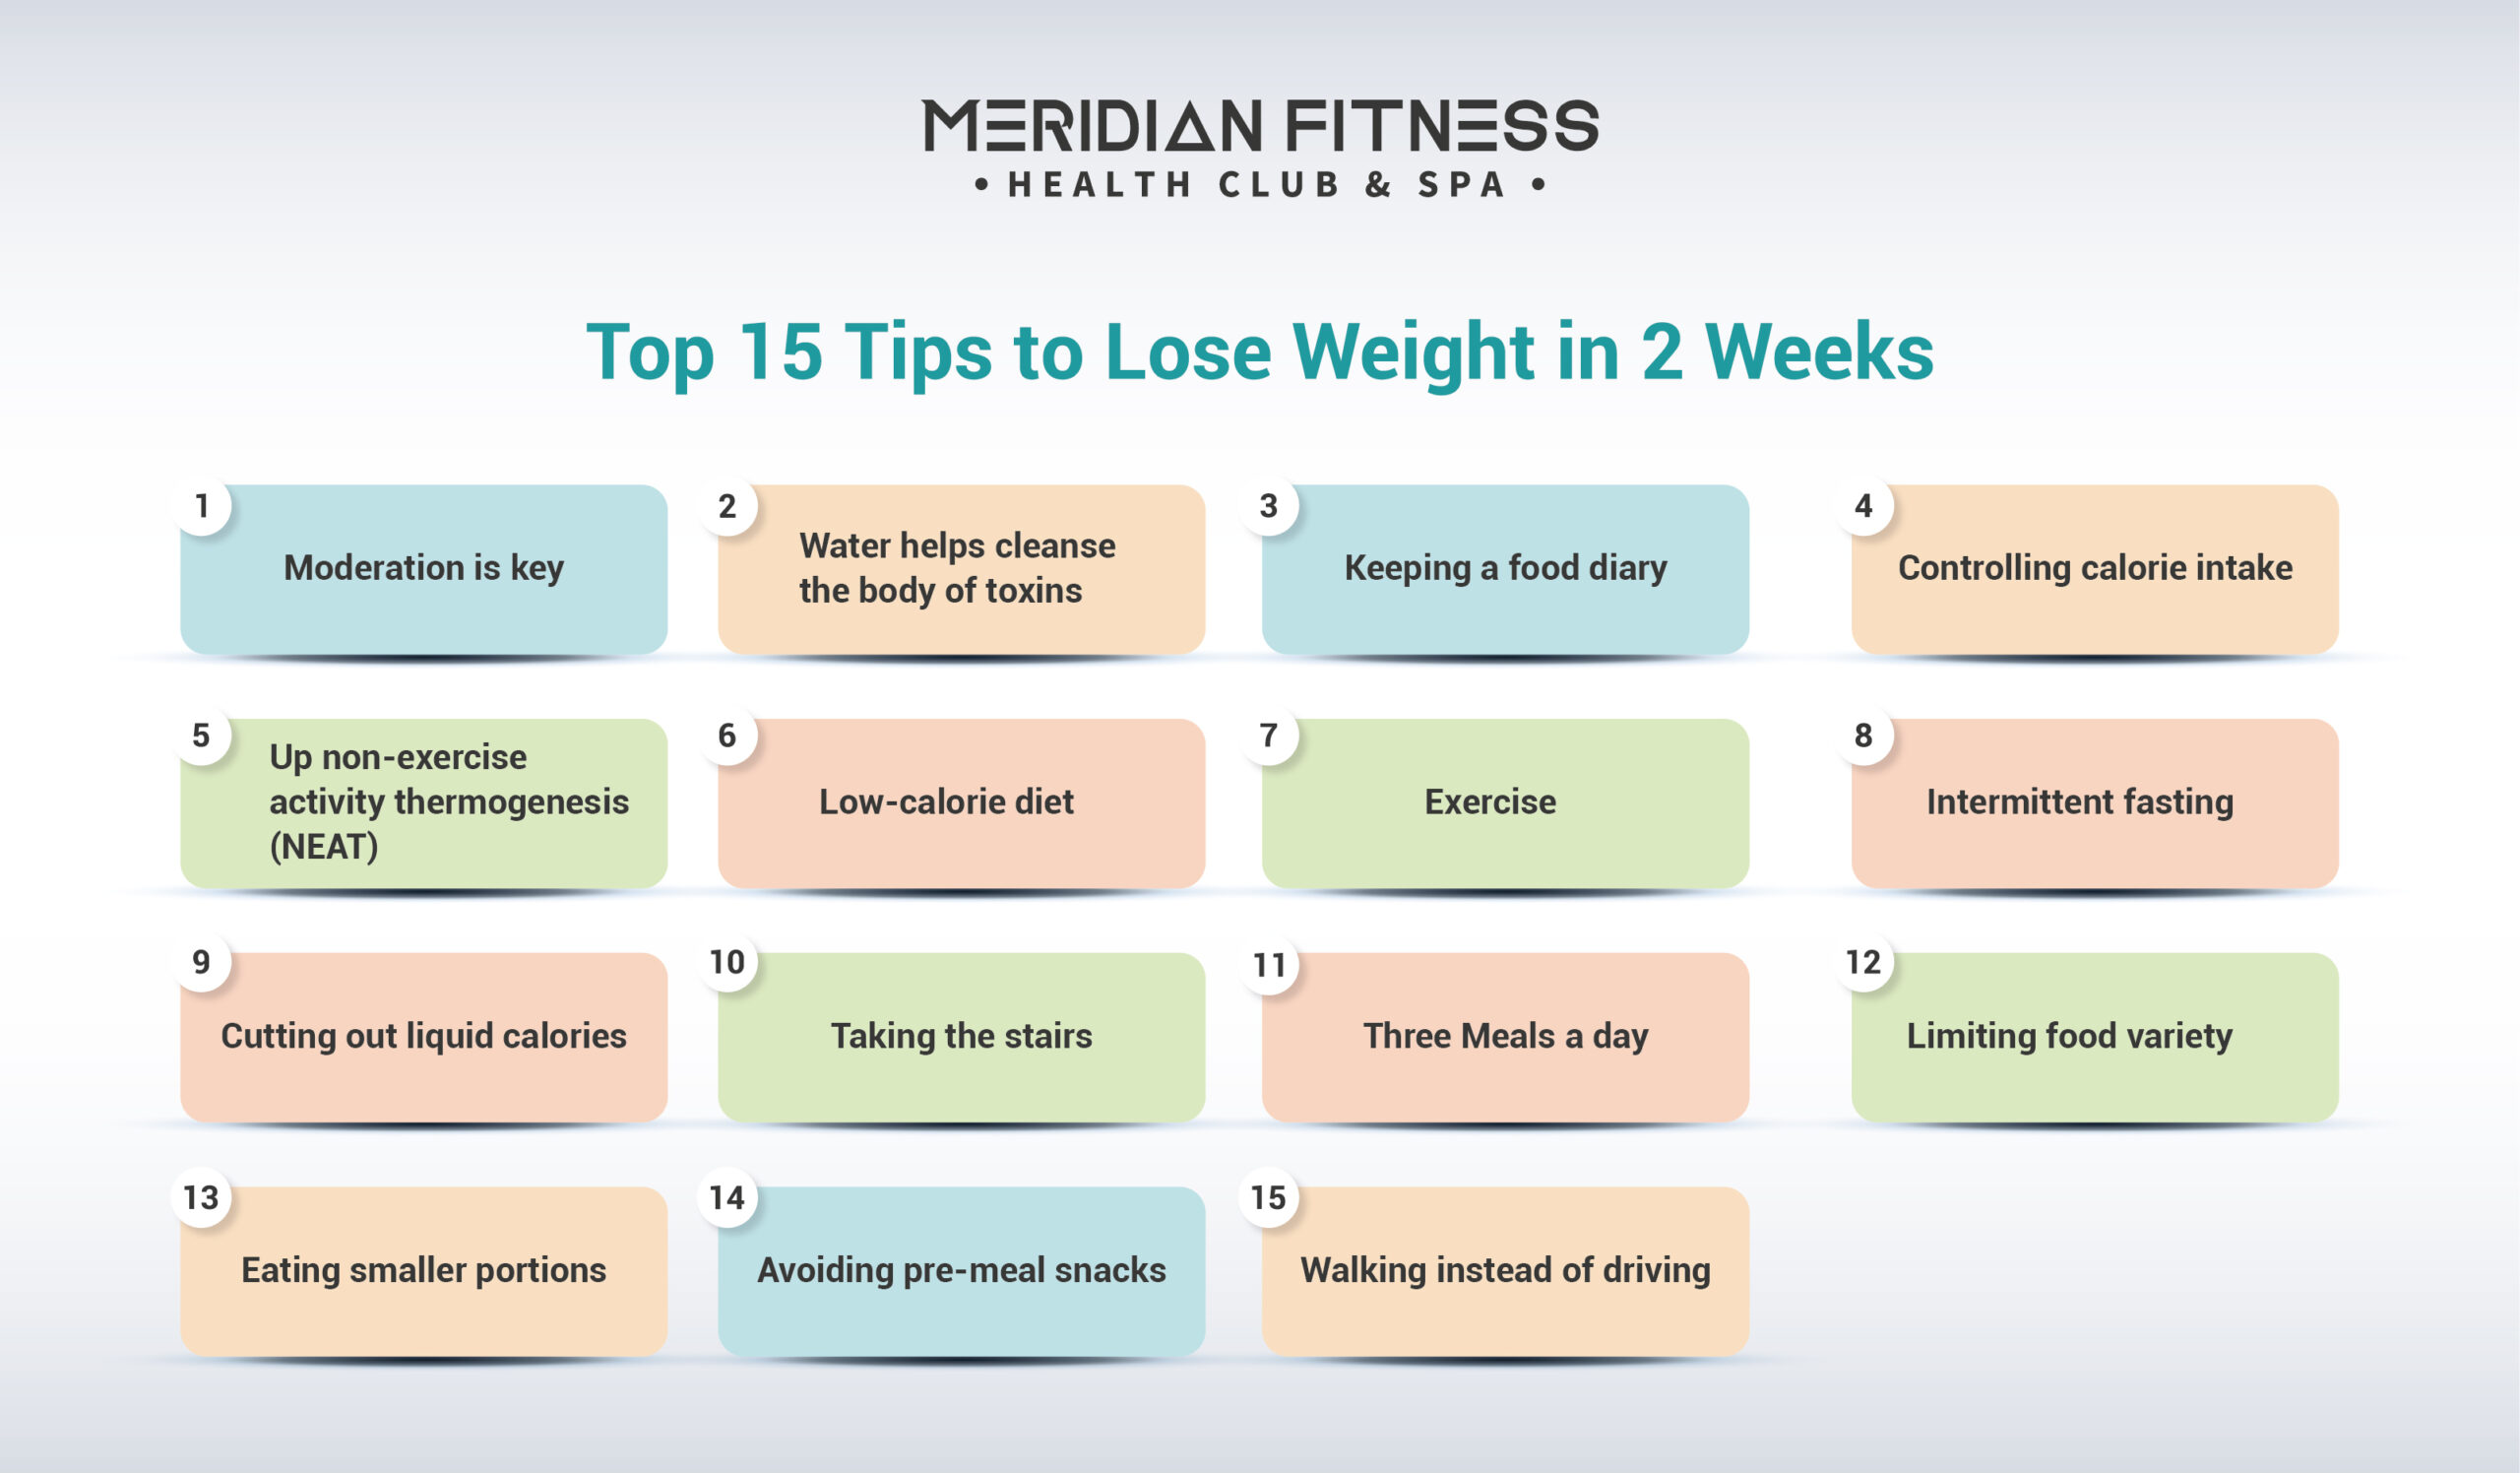 Top 15 Tips to Lose Weight in 2 Weeks - Meridian Fitness